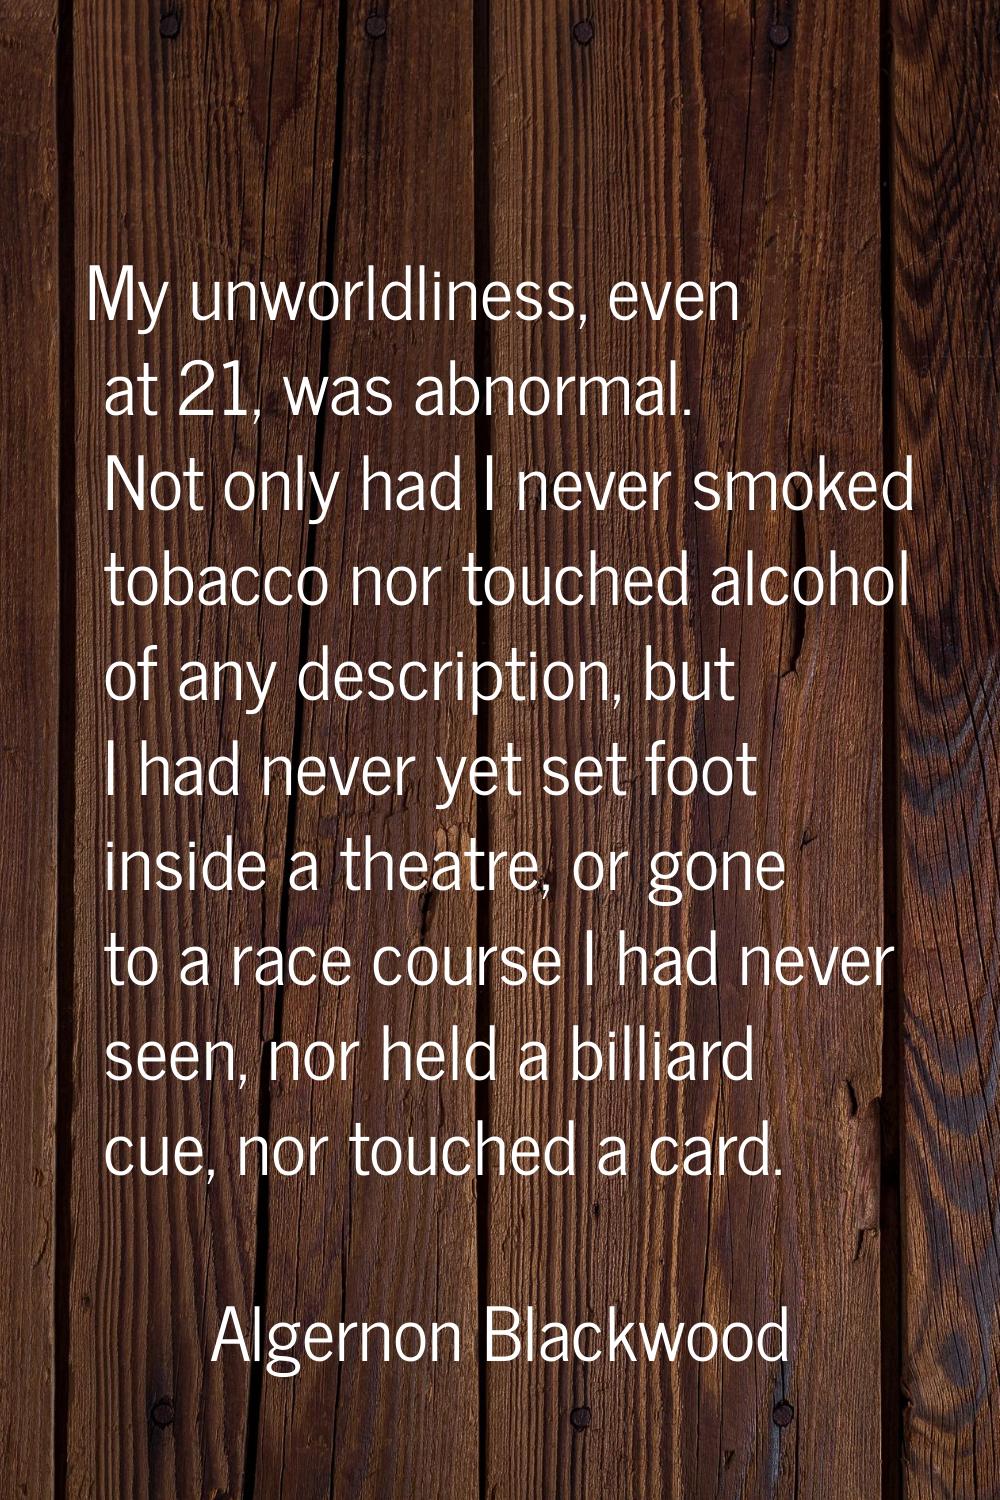 My unworldliness, even at 21, was abnormal. Not only had I never smoked tobacco nor touched alcohol